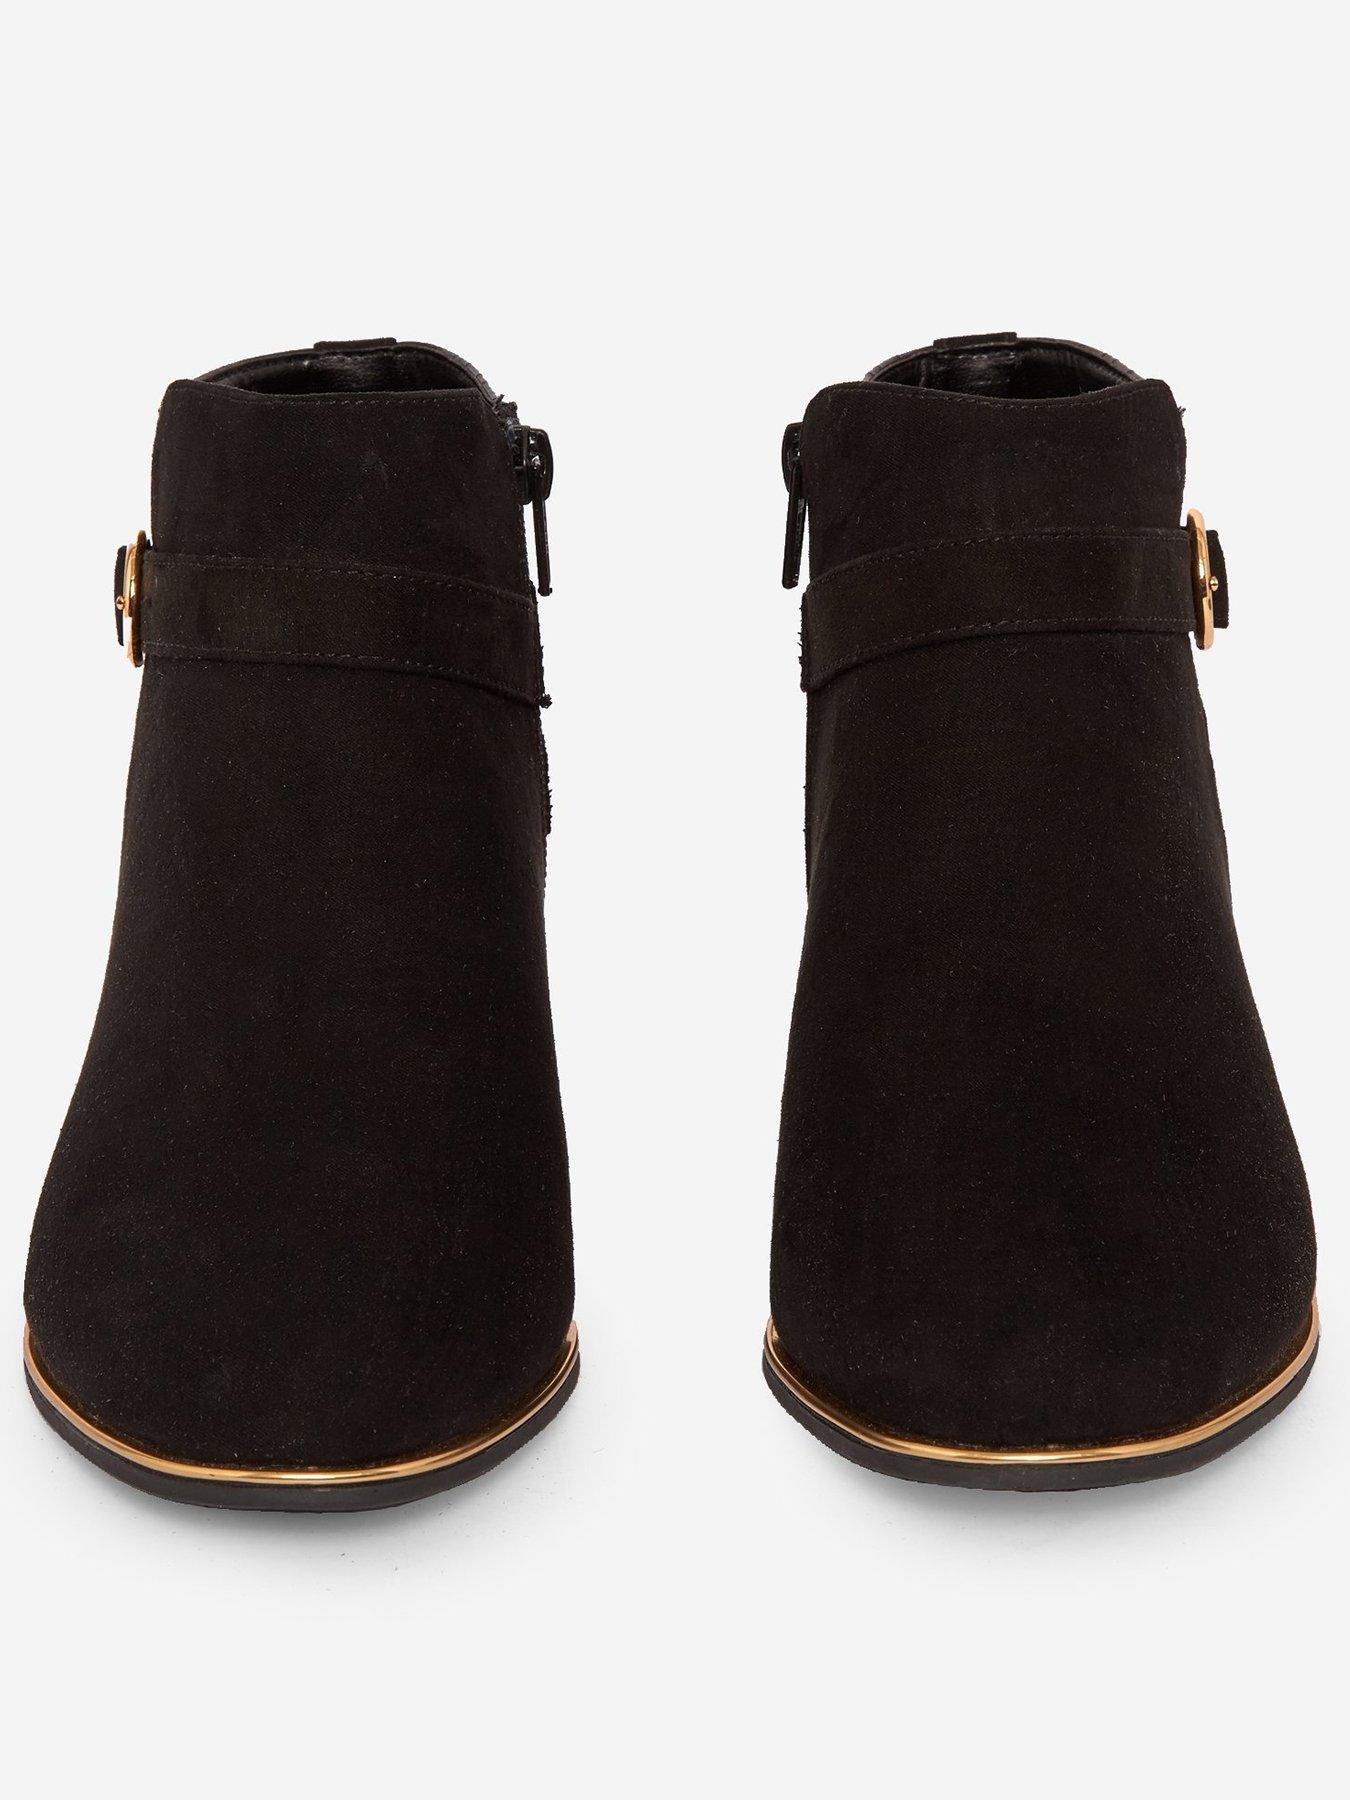 dorothy perkins ankle boots sale